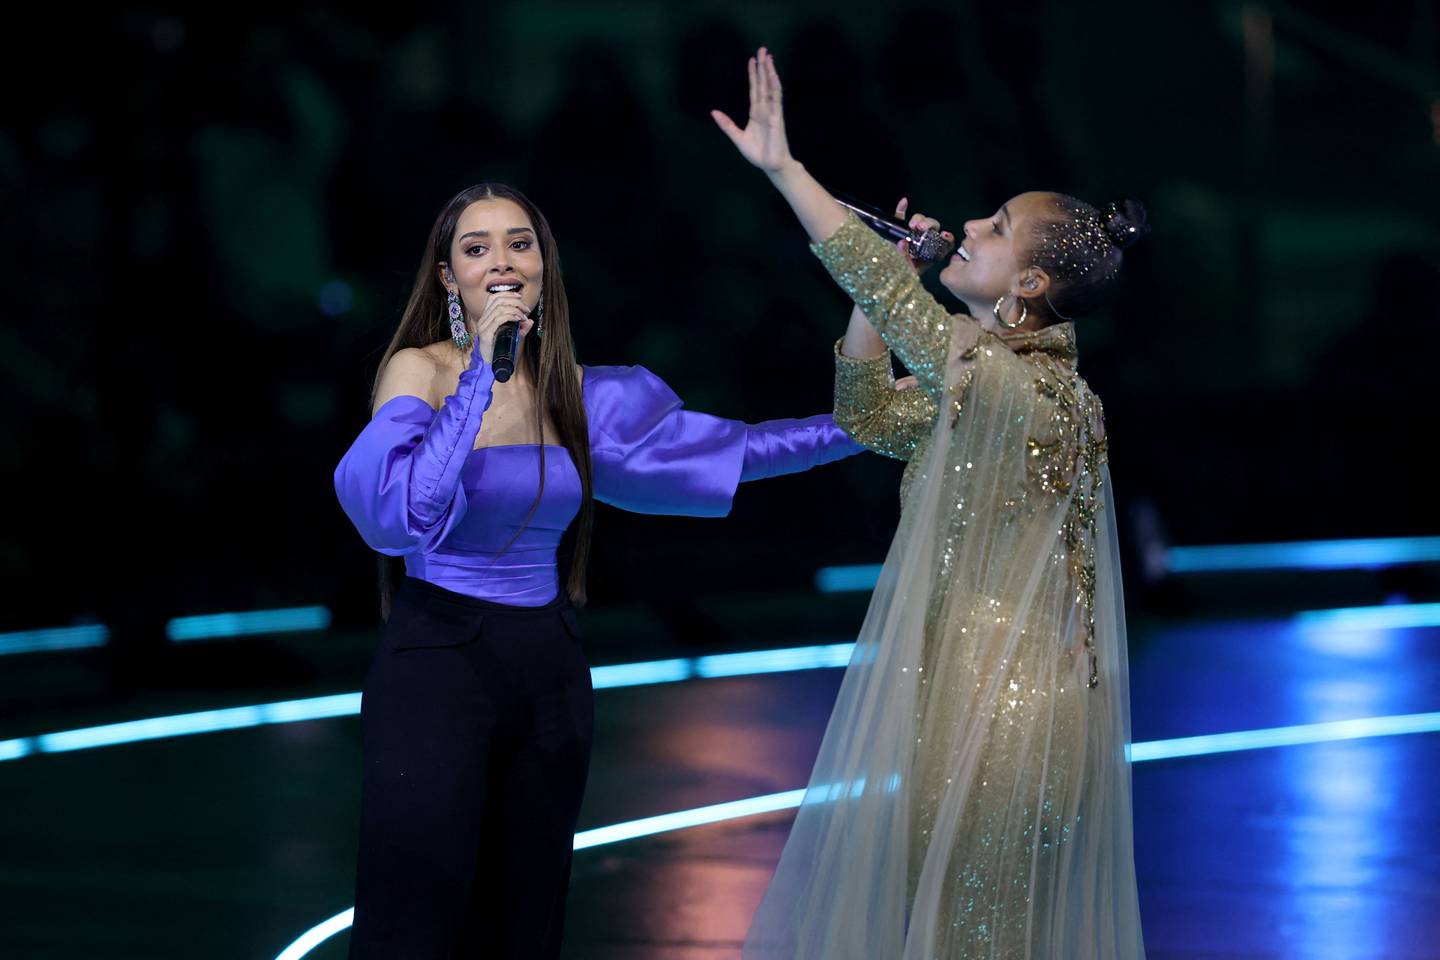 Keys with Emirati singer Balqees Fathi on stage. AFP